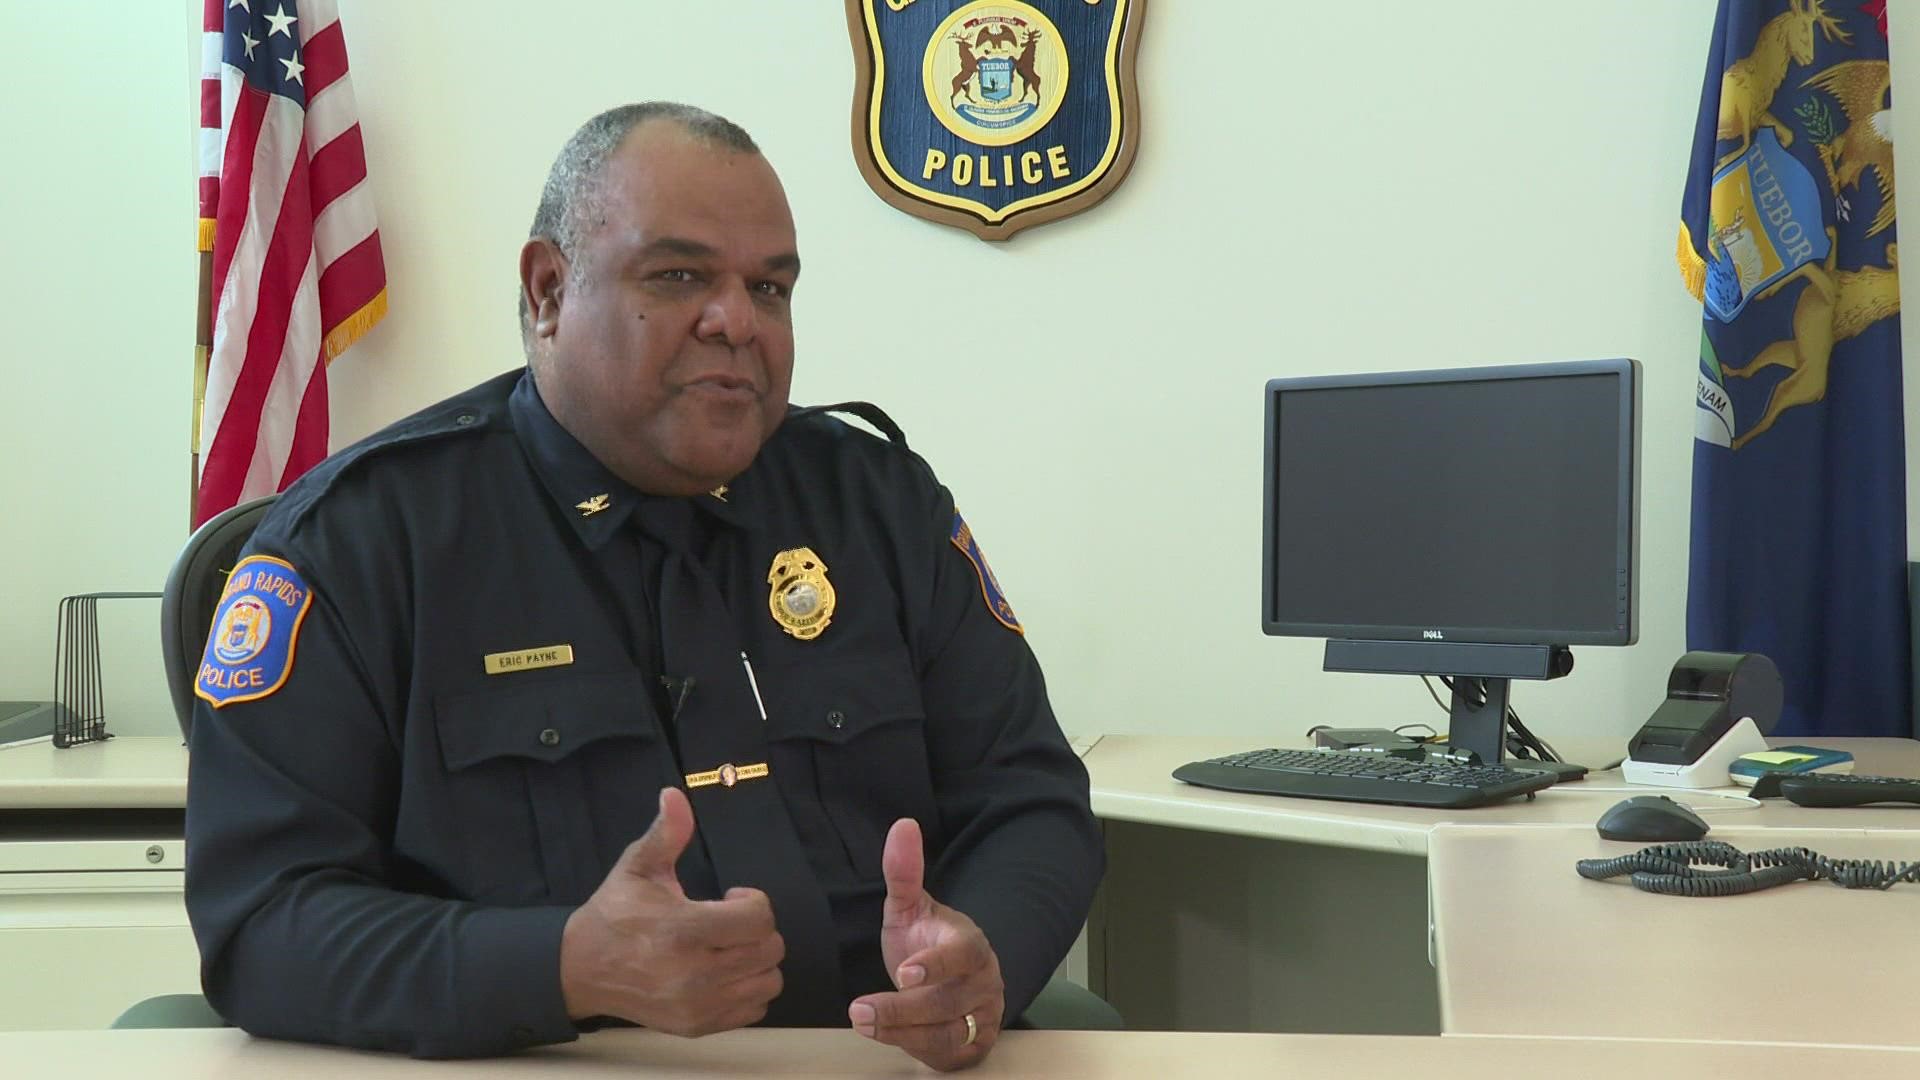 After more than 30 years working in the Grand Rapids Police Department, Chief Eric Payne's last day is Friday.